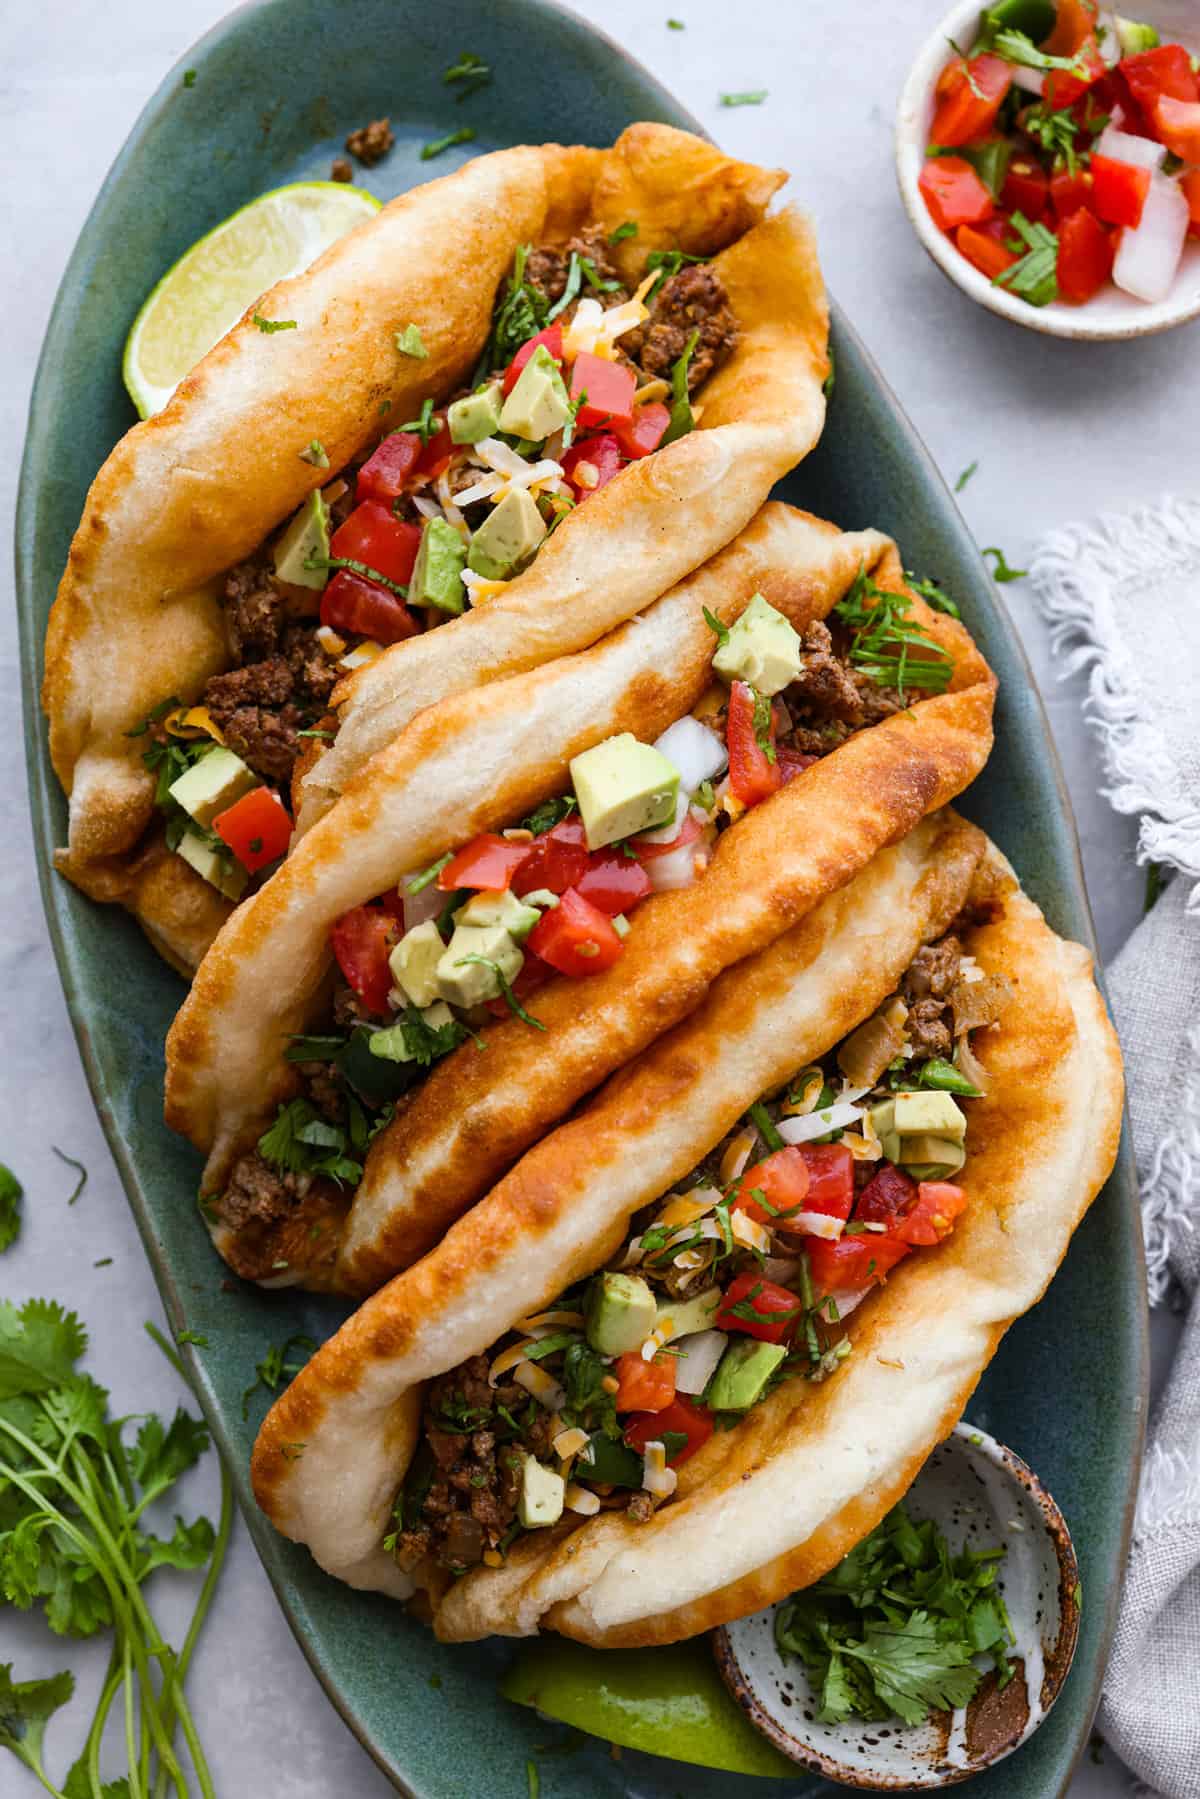 Homemade chalupas are a knockout dinner the whole family will go crazy over.